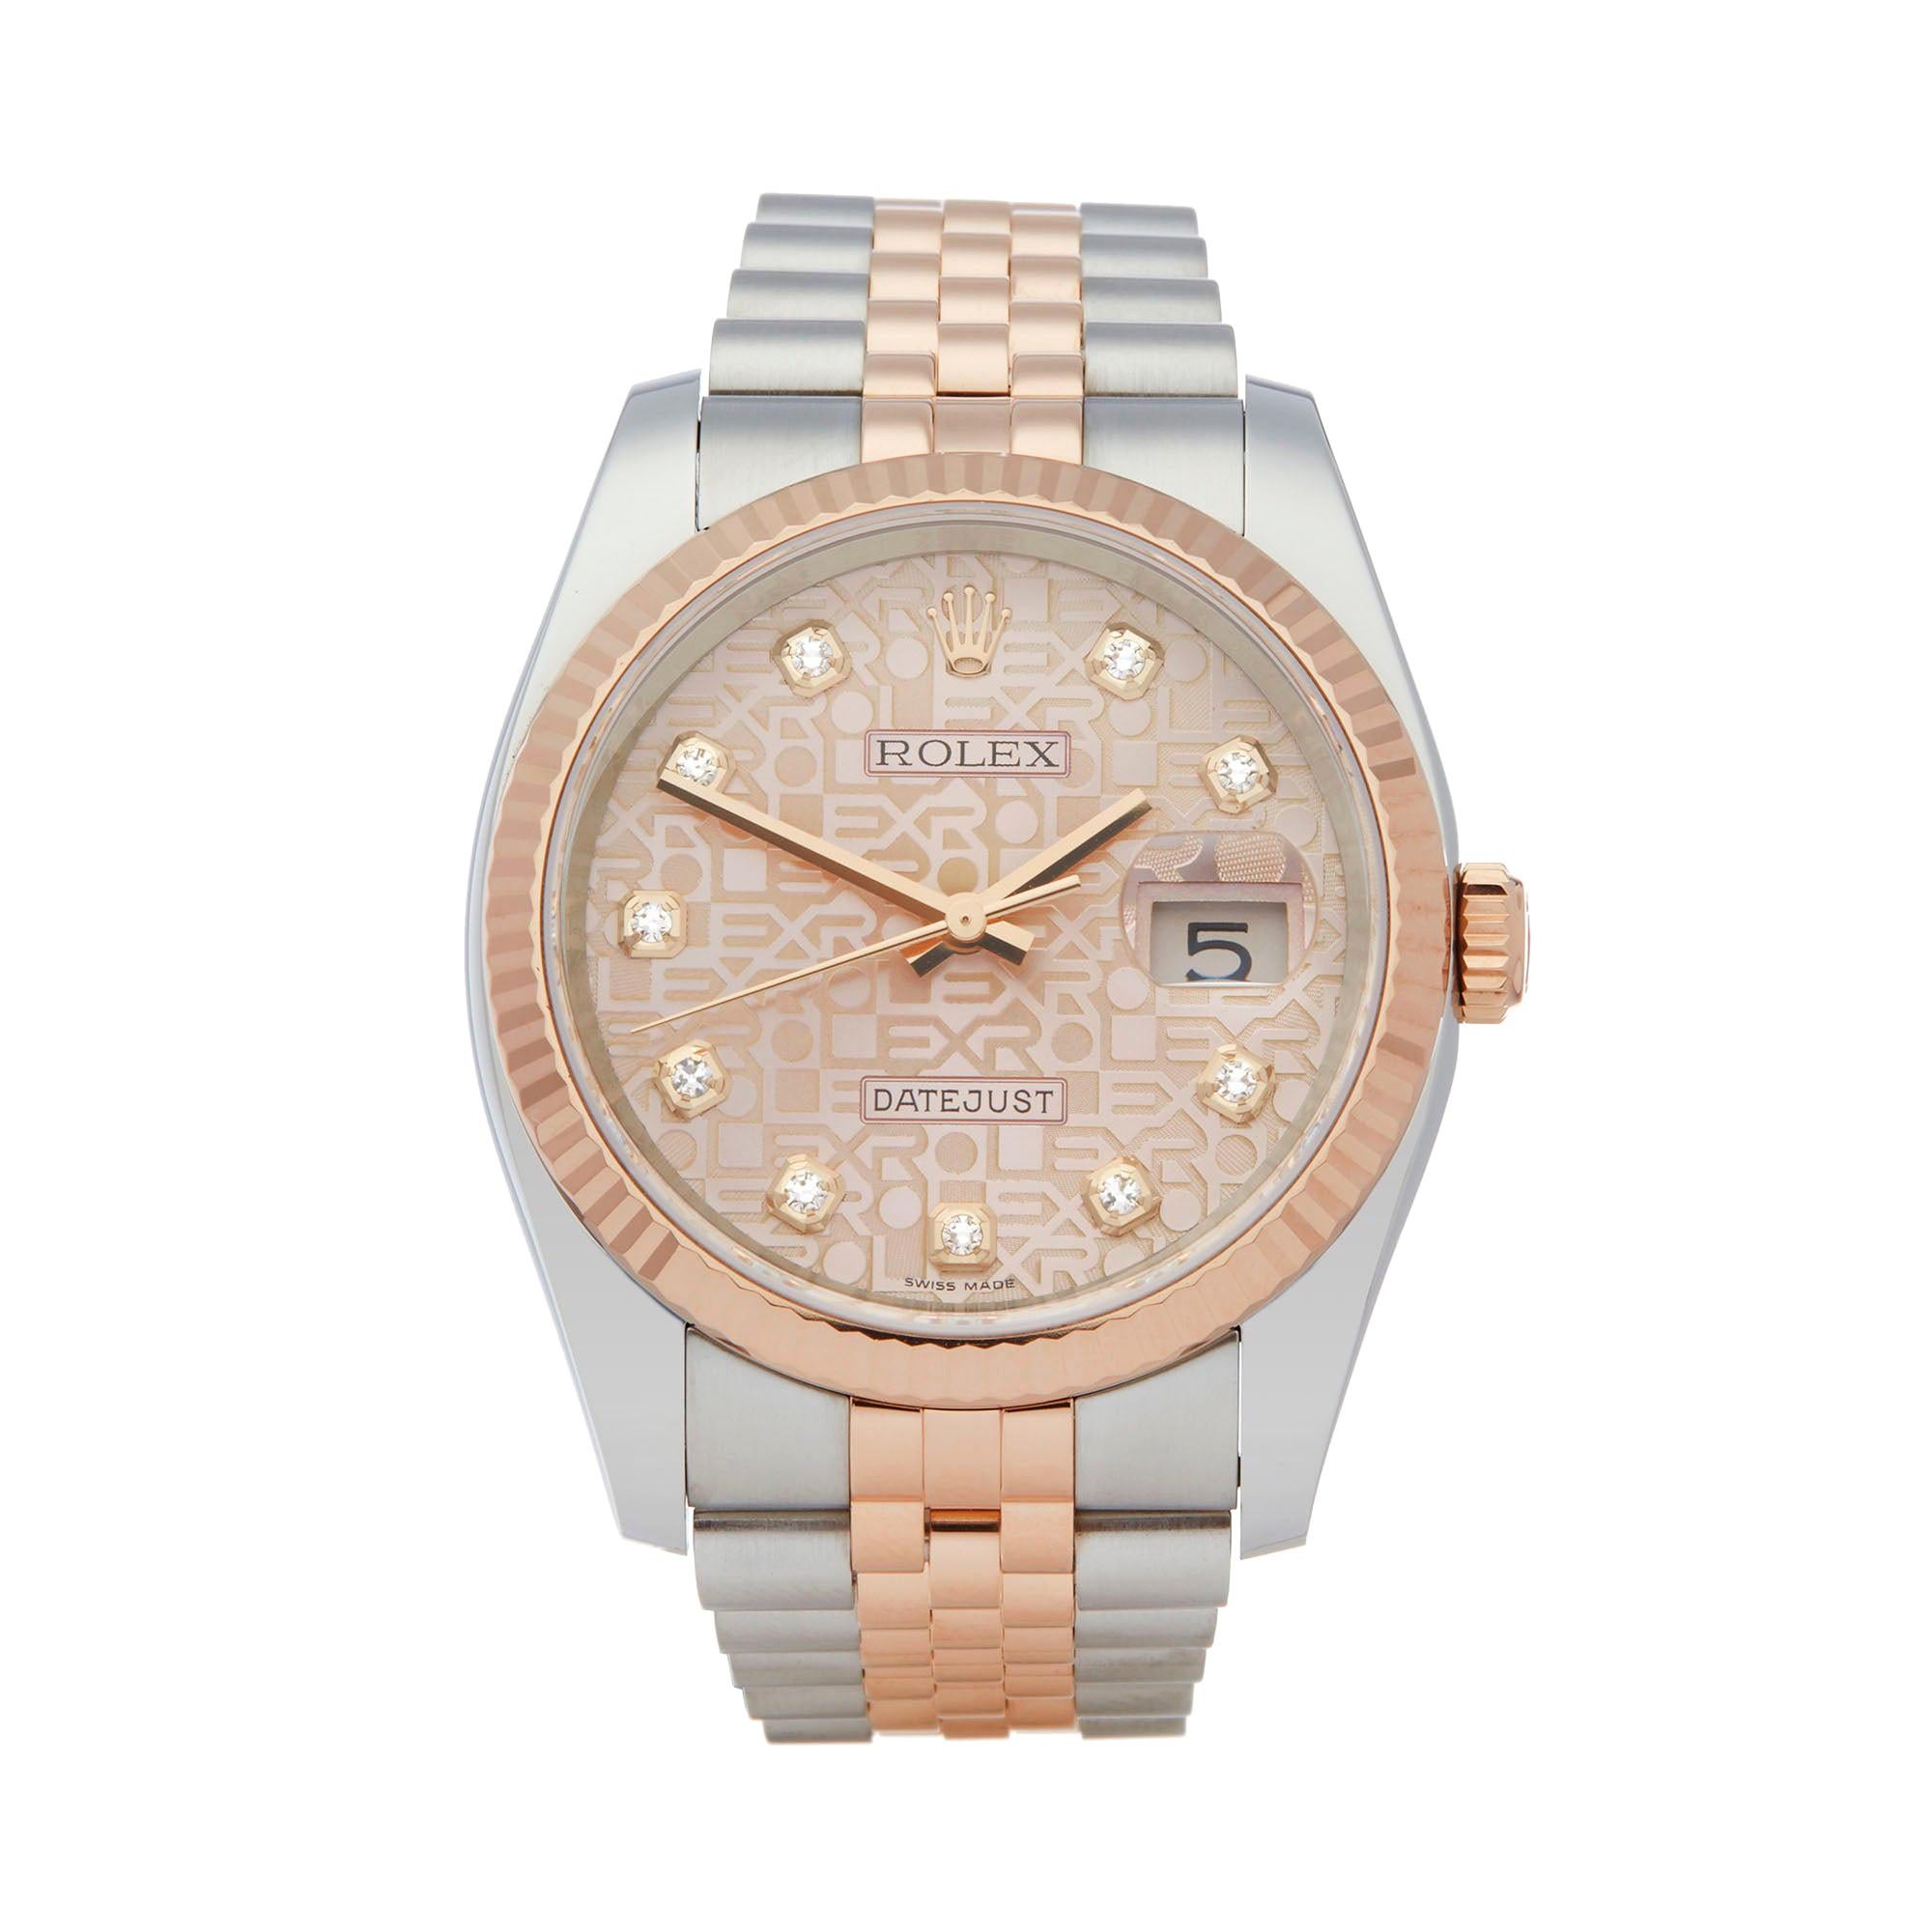 Rolex Datejust 36 Diamond Stainless Steel and Rose Gold 116231 Wristwatch